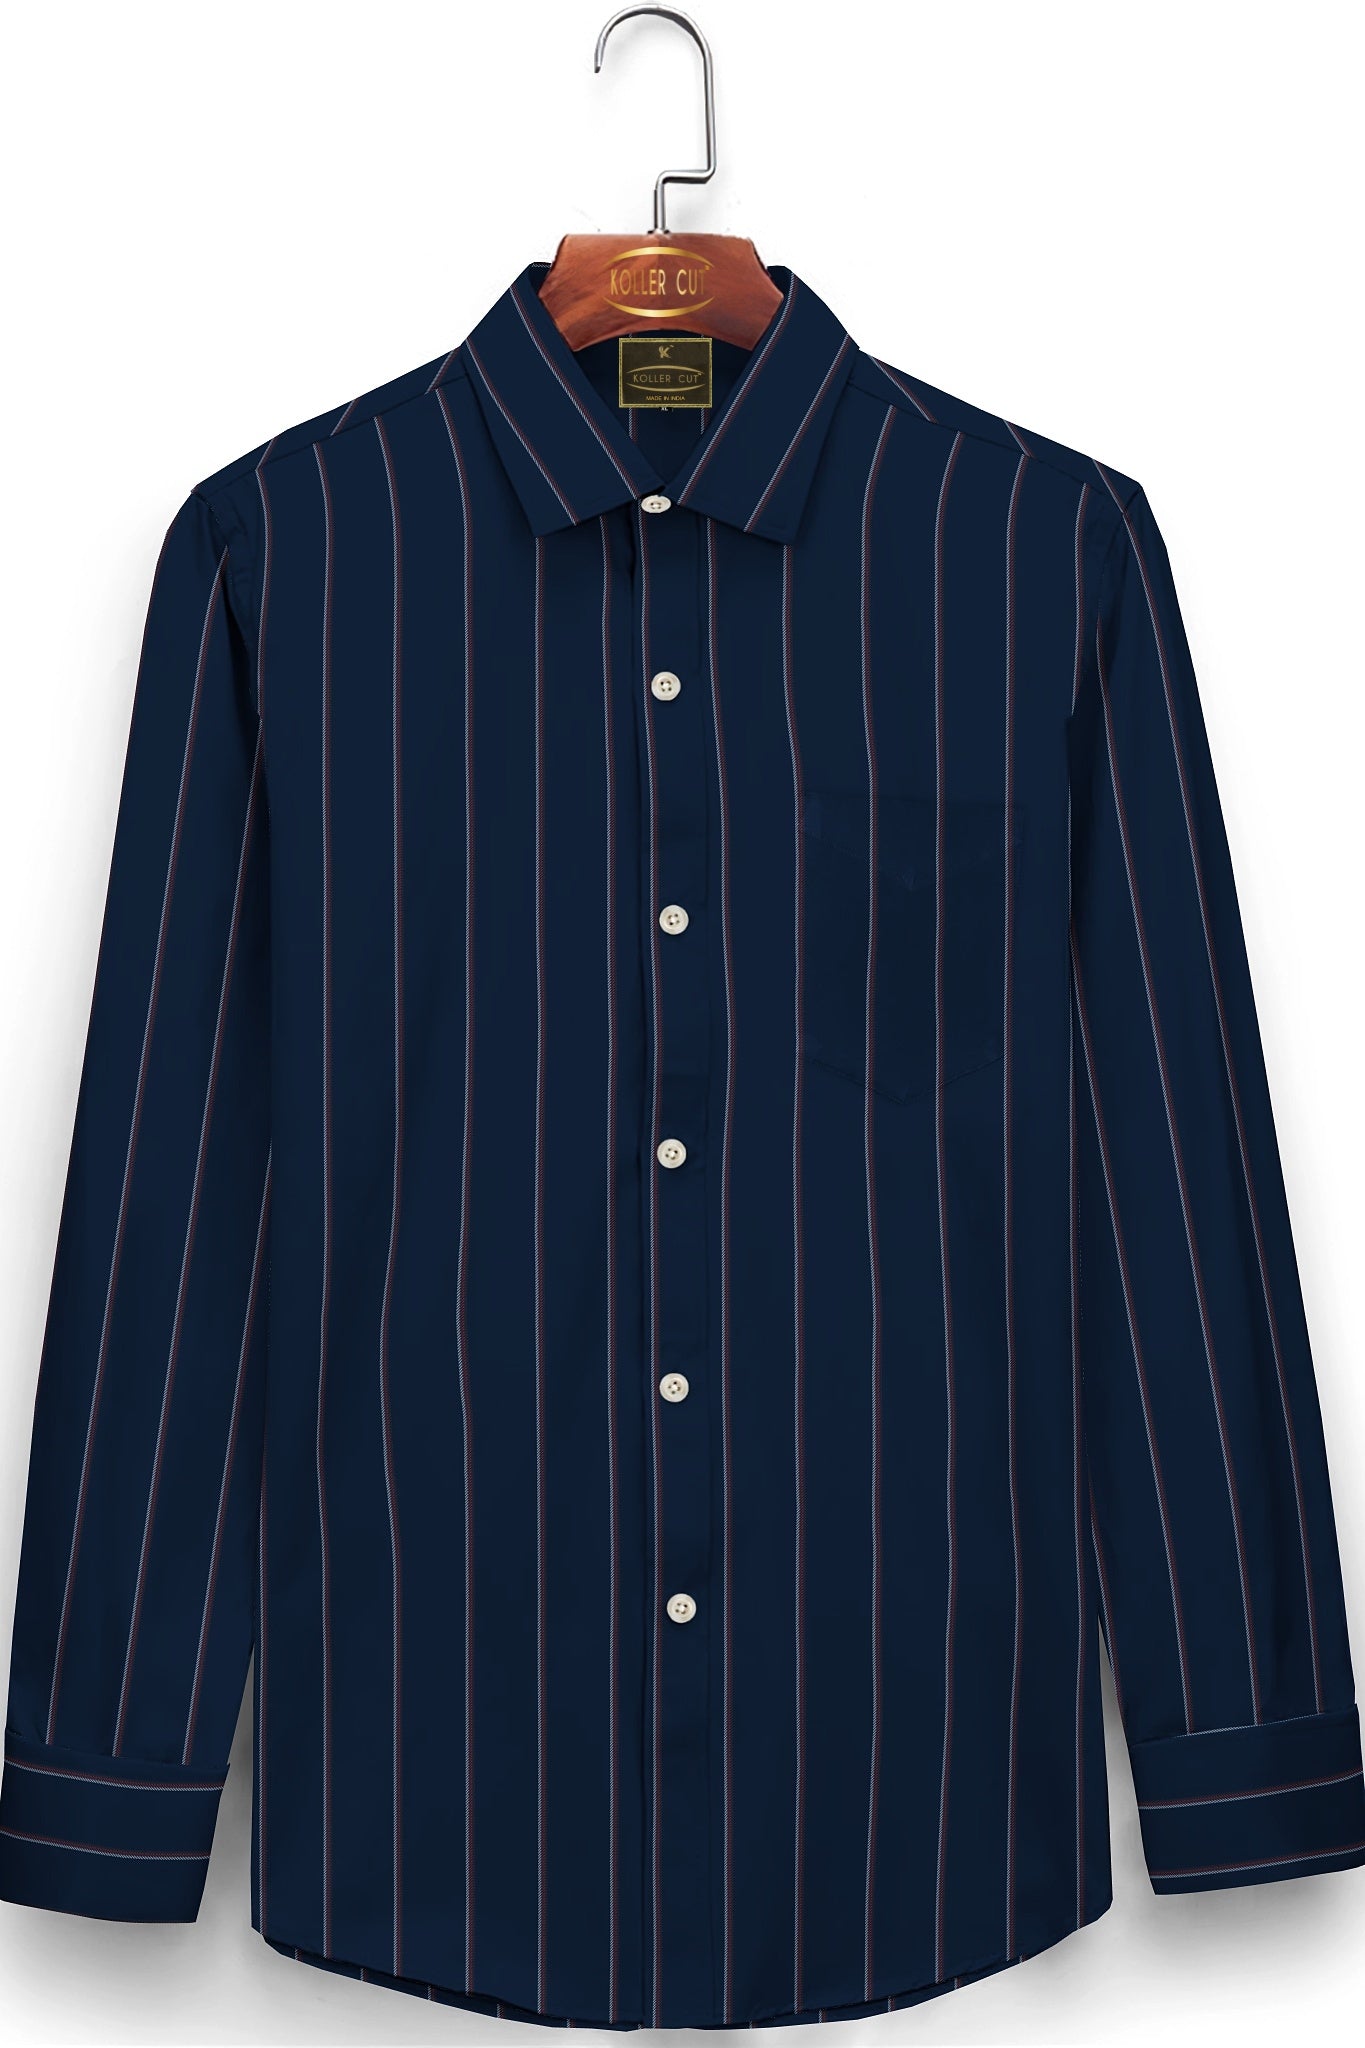 Denim Blue with Rust Red, Black and White Stripes Men's Cotton Shirt